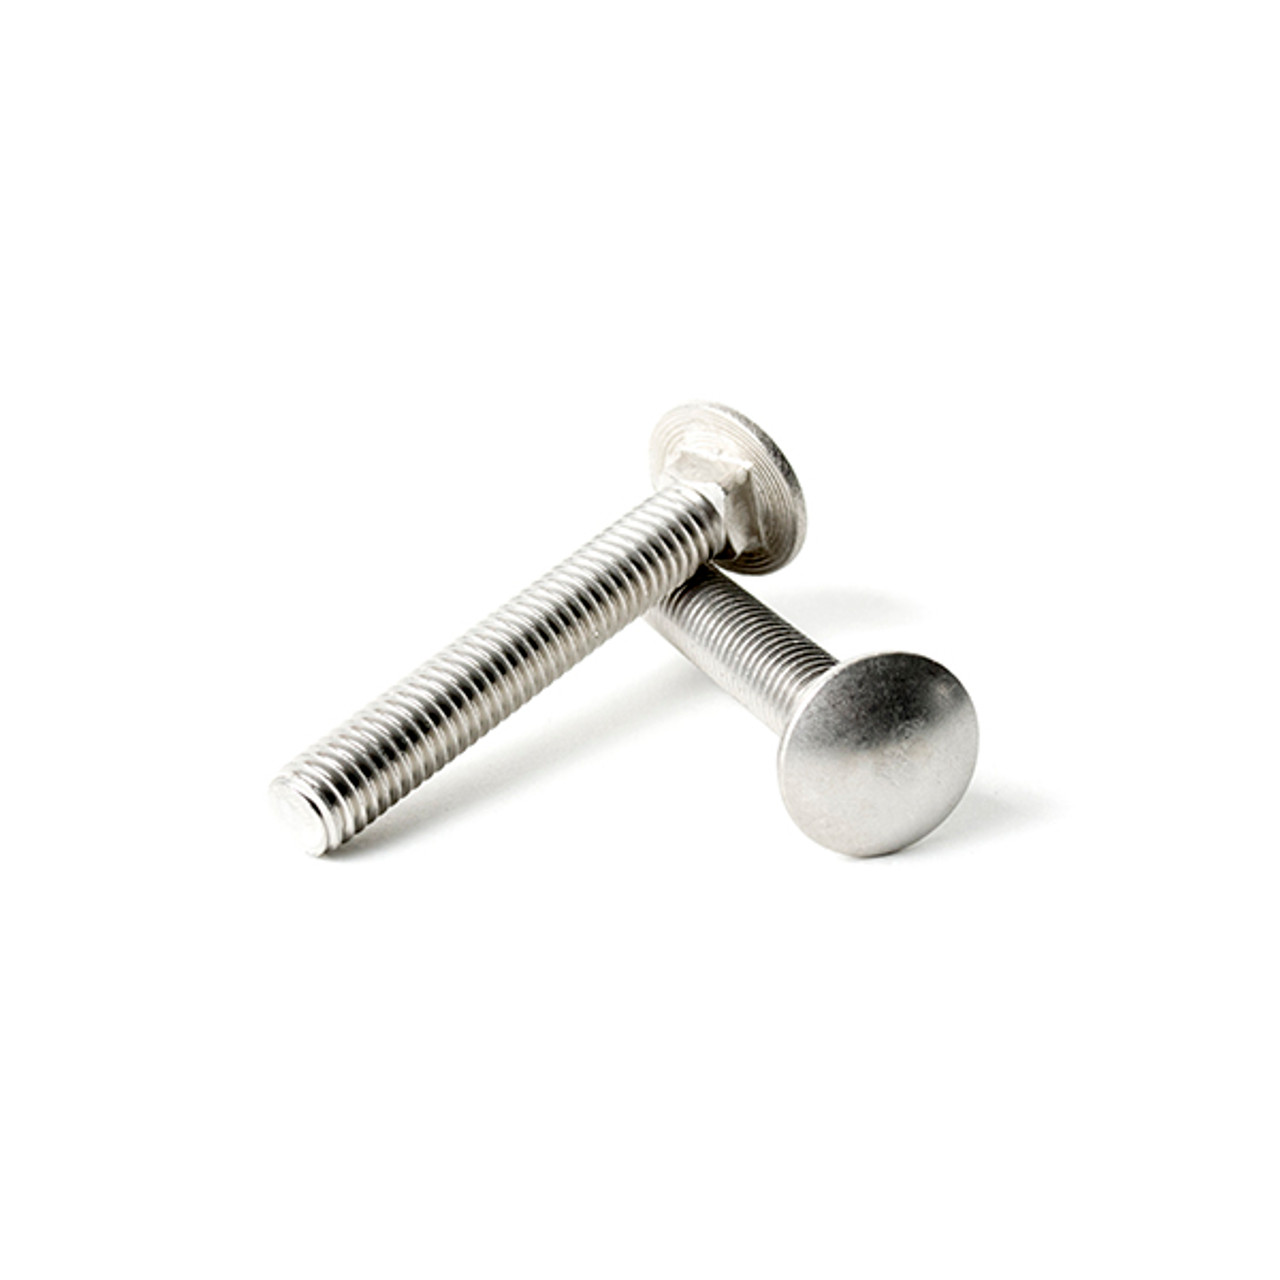 Tap Bolts 1/4"-20 x 1-1/8" Stainless Steel Hex Cap Screws SAE Coarse A2 18-8 